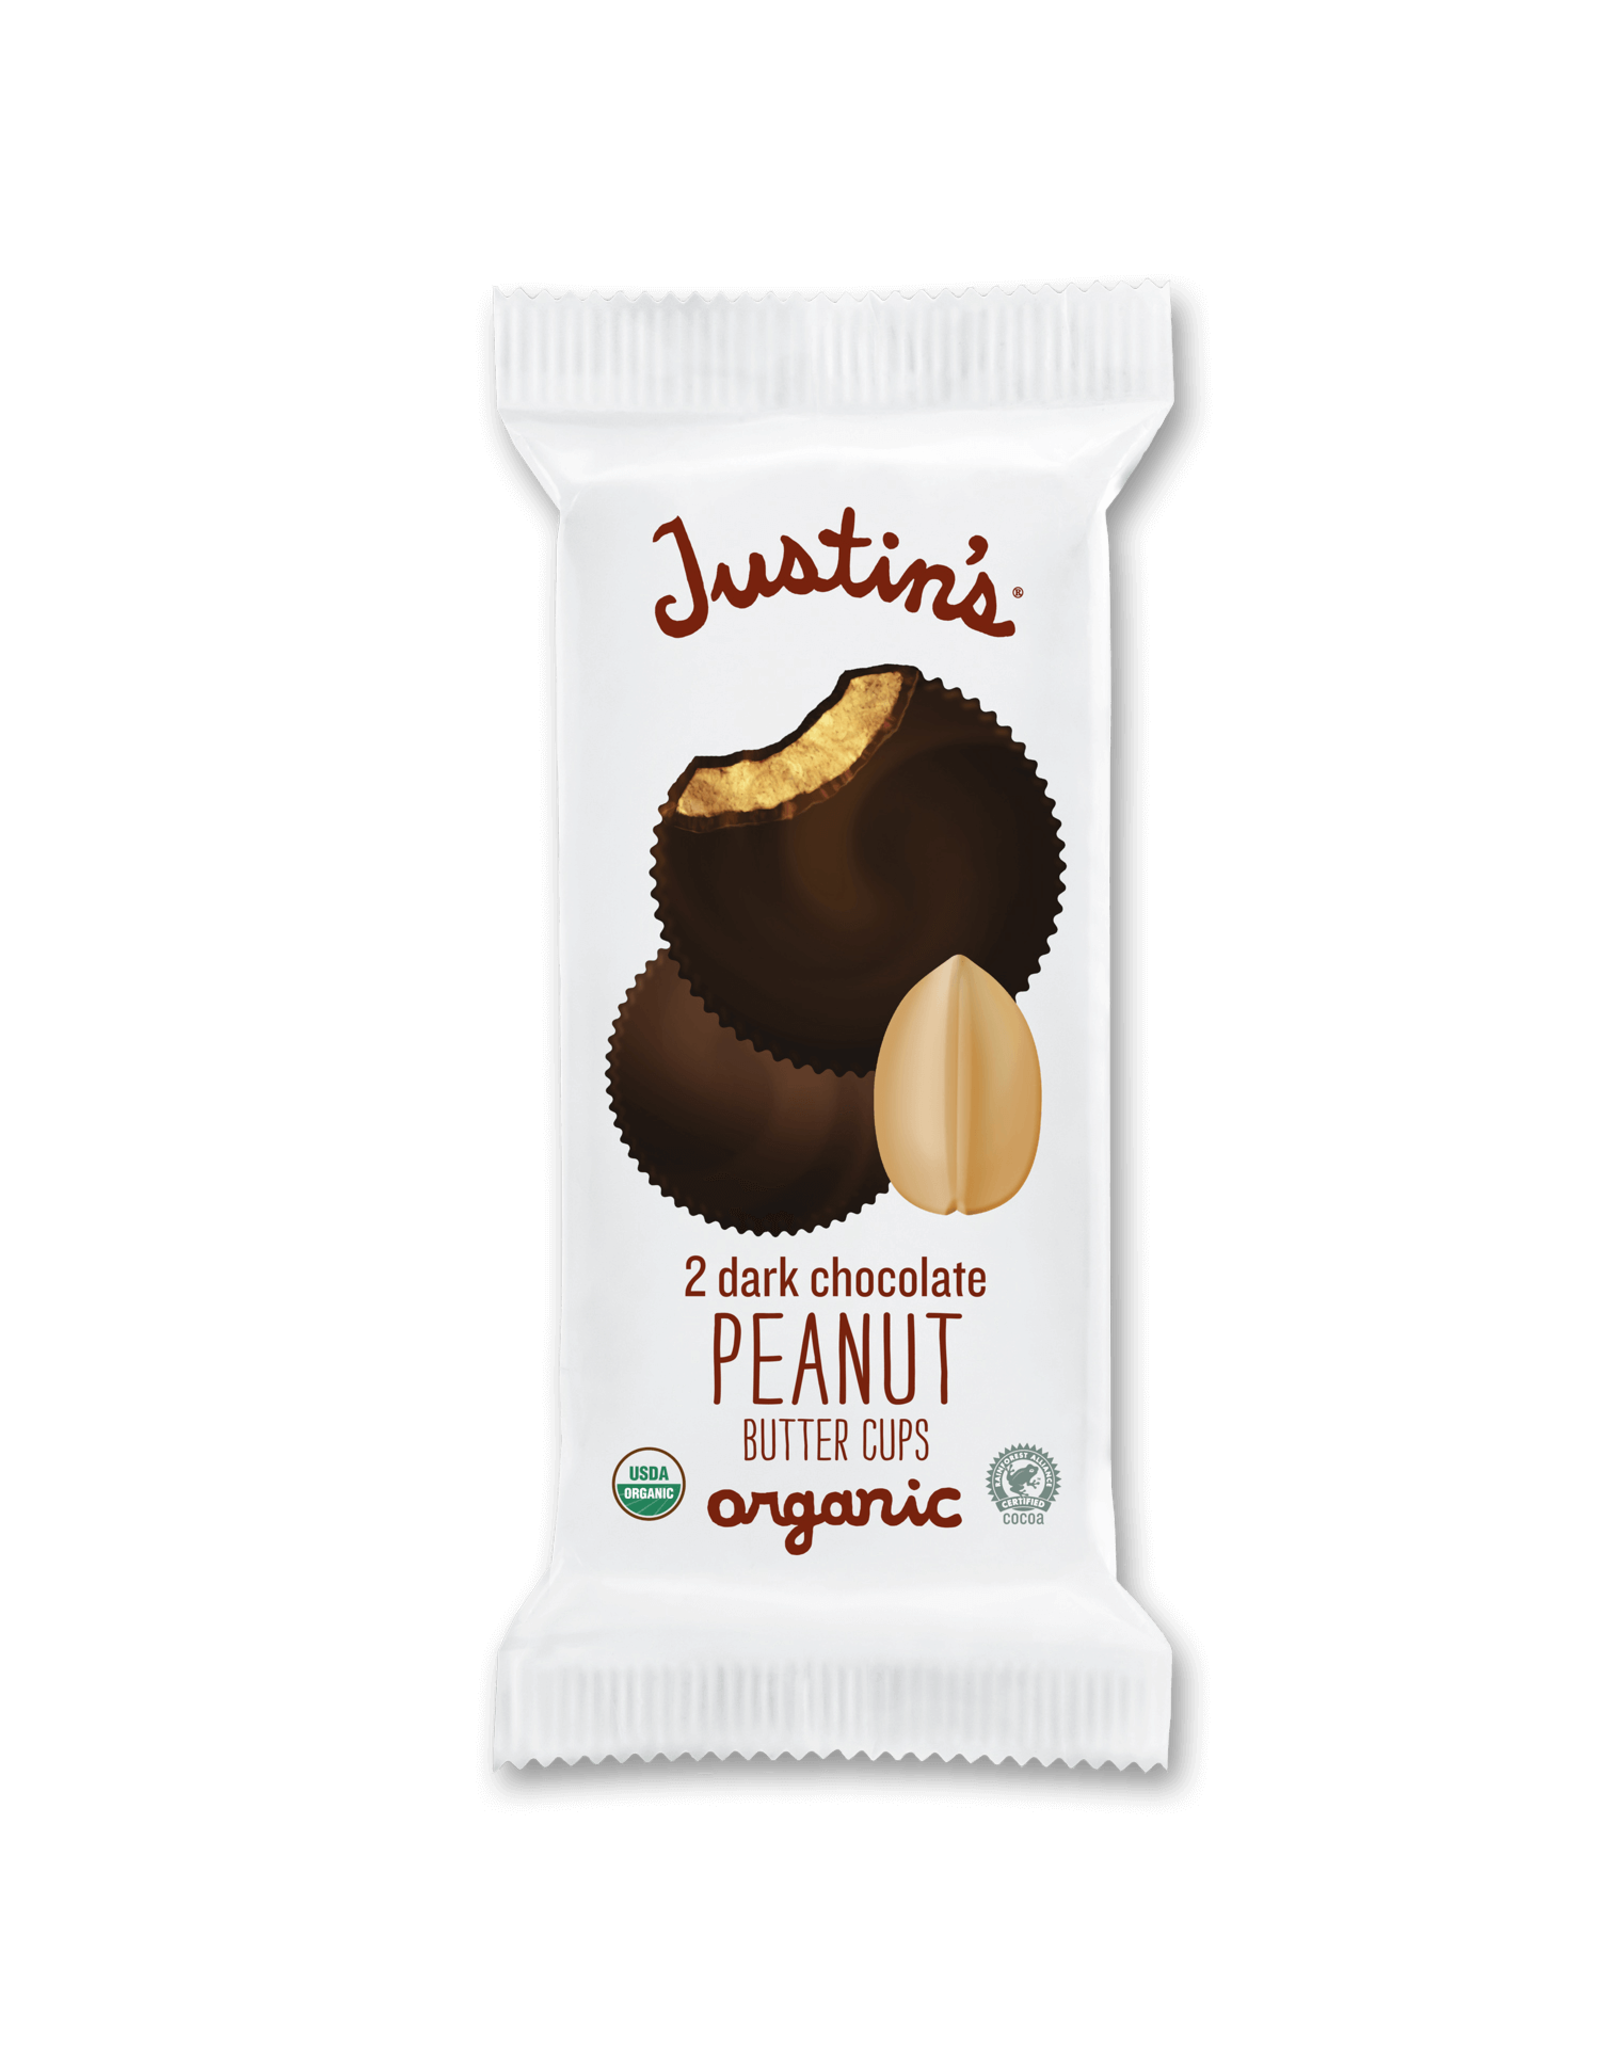 JUSTIN'S DARK CHOCOLATE PEANUT BUTTER CUPS, 2 COUNT